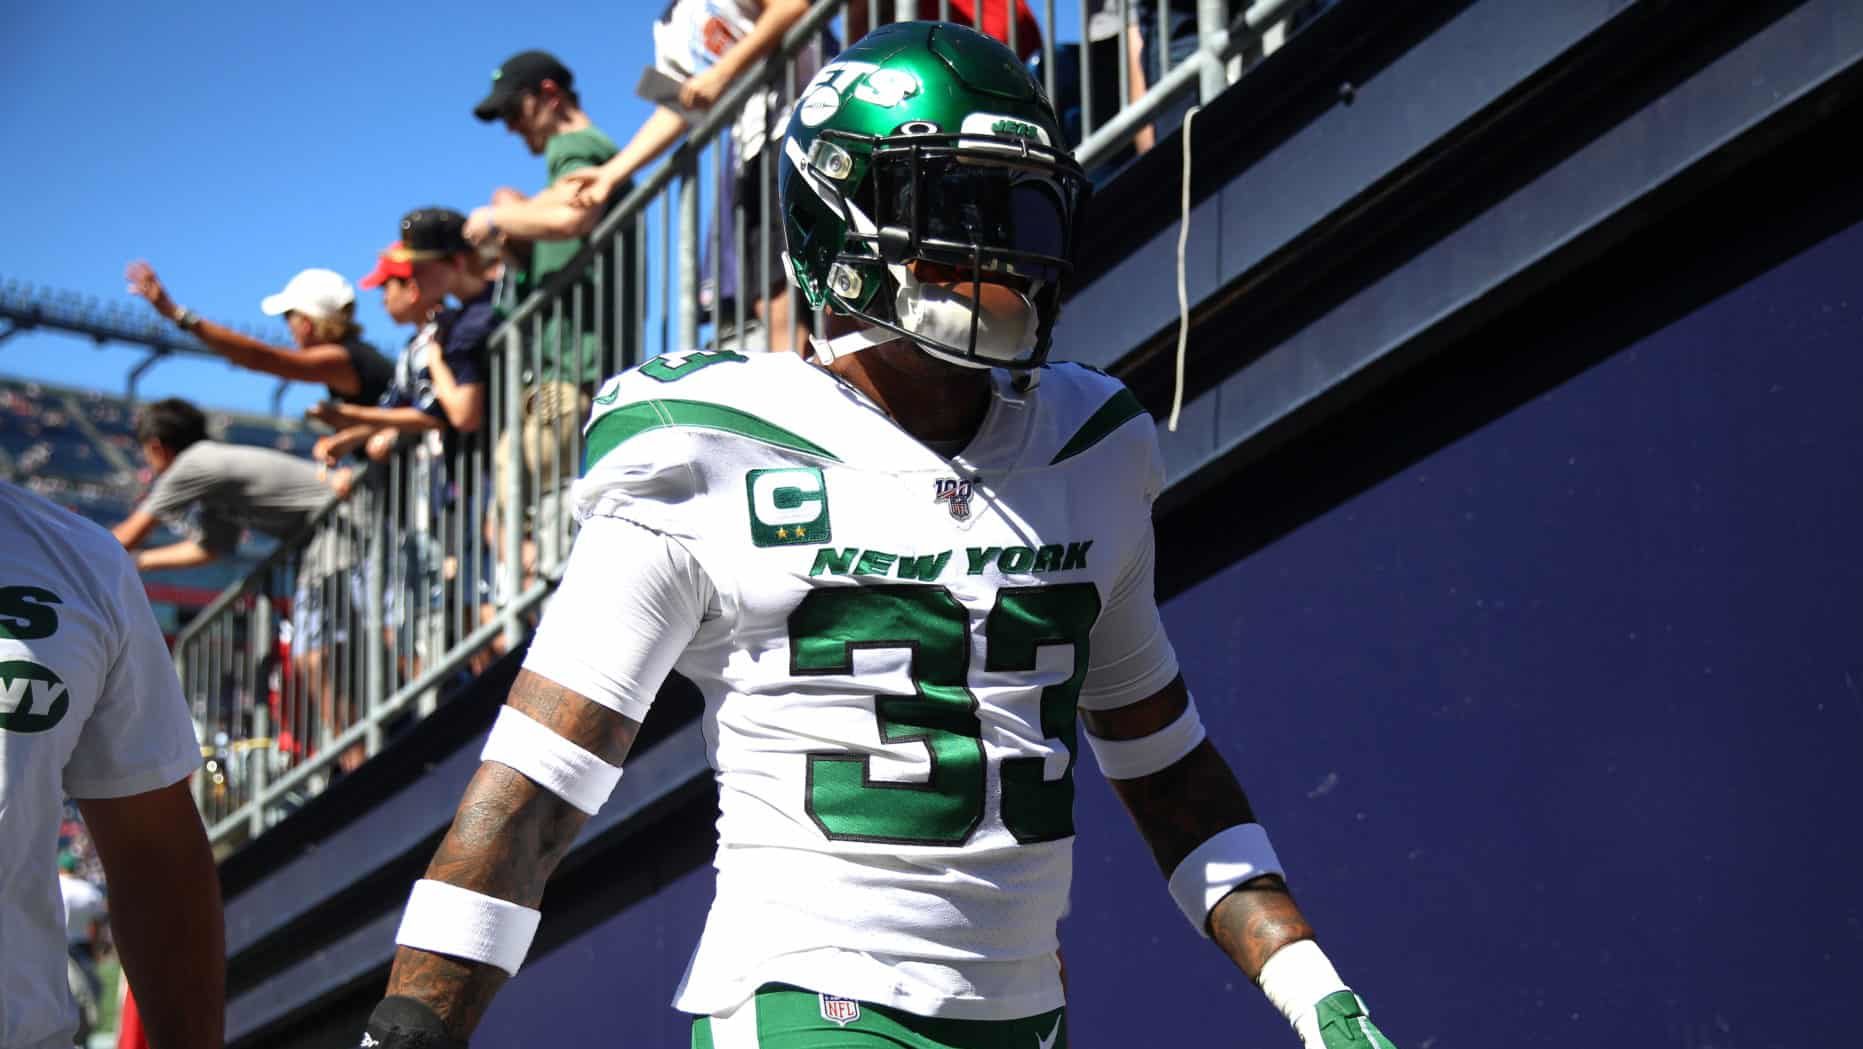 FOXBOROUGH, MASSACHUSETTS - SEPTEMBER 22: Jamal Adams #33 of the New York Jets walks back to the locker room prior to the game against the New England Patriots at Gillette Stadium on September 22, 2019 in Foxborough, Massachusetts.